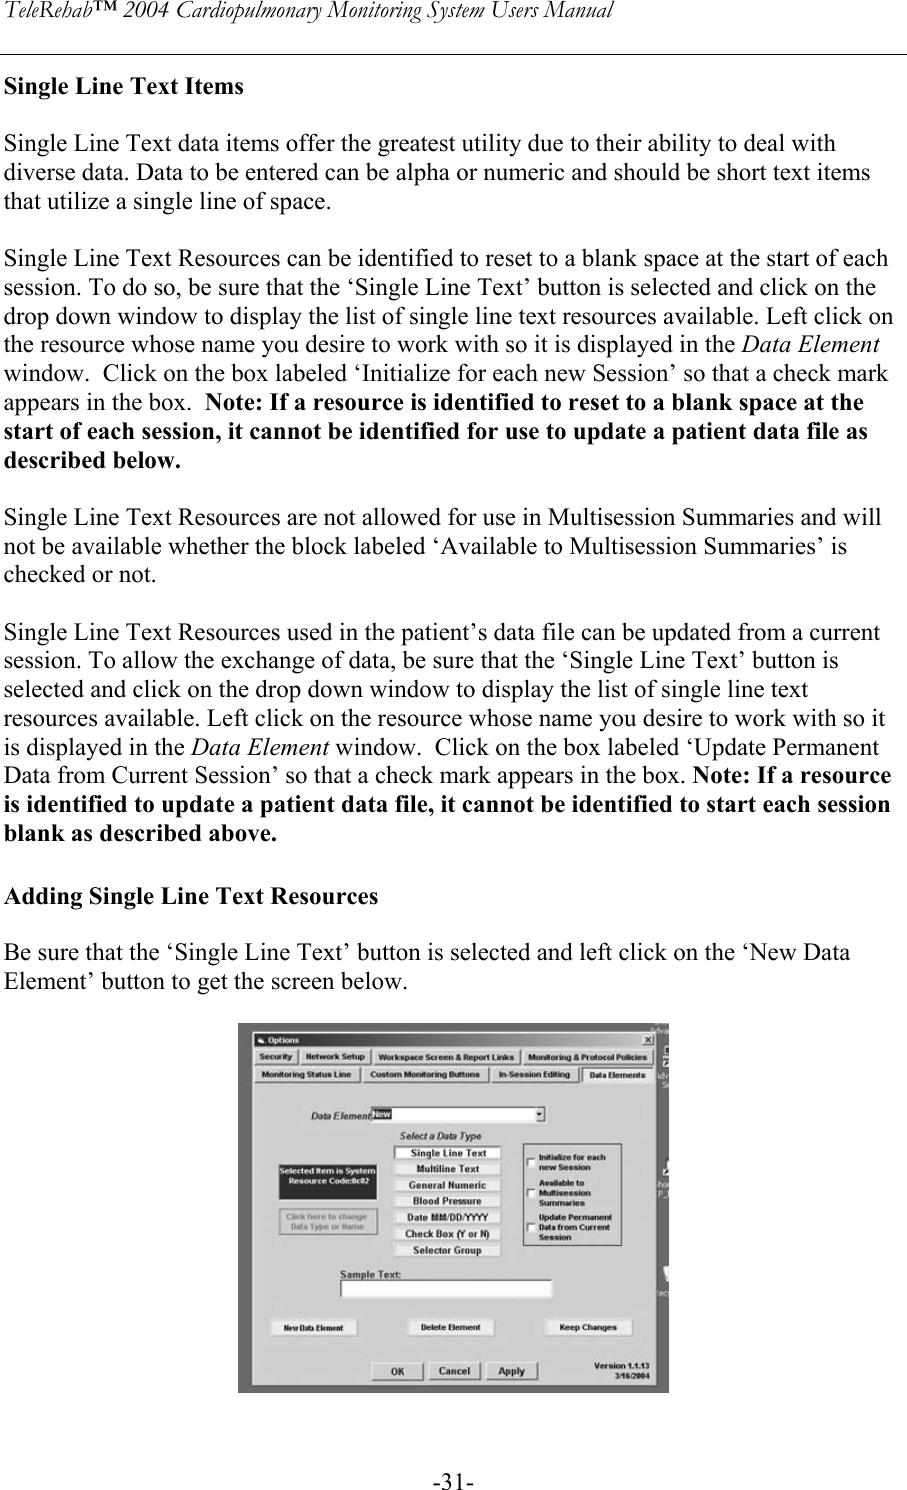 TeleRehab™ 2004 Cardiopulmonary Monitoring System Users Manual    -31-Single Line Text Items  Single Line Text data items offer the greatest utility due to their ability to deal with diverse data. Data to be entered can be alpha or numeric and should be short text items that utilize a single line of space.  Single Line Text Resources can be identified to reset to a blank space at the start of each session. To do so, be sure that the ‘Single Line Text’ button is selected and click on the  drop down window to display the list of single line text resources available. Left click on  the resource whose name you desire to work with so it is displayed in the Data Element window.  Click on the box labeled ‘Initialize for each new Session’ so that a check mark  appears in the box.  Note: If a resource is identified to reset to a blank space at the  start of each session, it cannot be identified for use to update a patient data file as described below.  Single Line Text Resources are not allowed for use in Multisession Summaries and will not be available whether the block labeled ‘Available to Multisession Summaries’ is checked or not.  Single Line Text Resources used in the patient’s data file can be updated from a current session. To allow the exchange of data, be sure that the ‘Single Line Text’ button is selected and click on the drop down window to display the list of single line text resources available. Left click on the resource whose name you desire to work with so it is displayed in the Data Element window.  Click on the box labeled ‘Update Permanent Data from Current Session’ so that a check mark appears in the box. Note: If a resource is identified to update a patient data file, it cannot be identified to start each session blank as described above.   Adding Single Line Text Resources  Be sure that the ‘Single Line Text’ button is selected and left click on the ‘New Data Element’ button to get the screen below.      